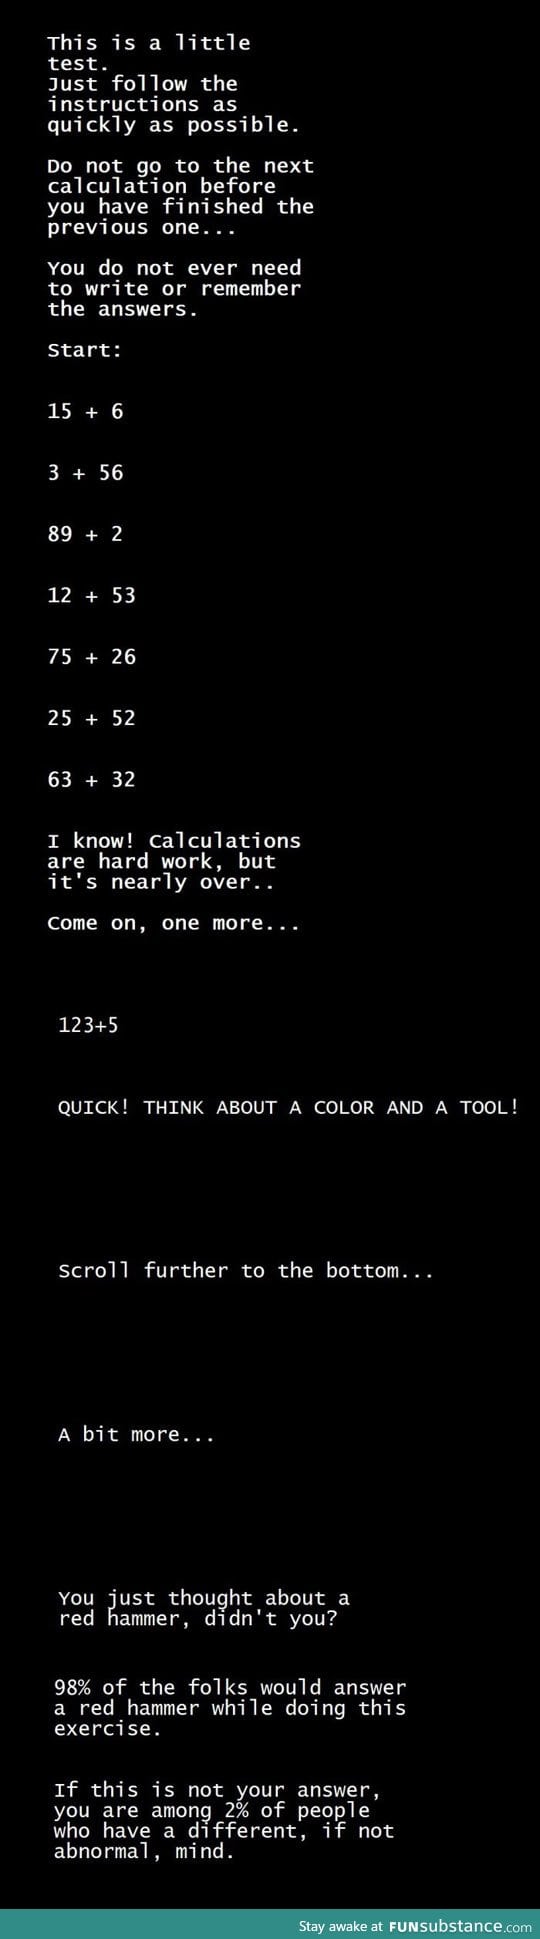 This little test will blow your mind